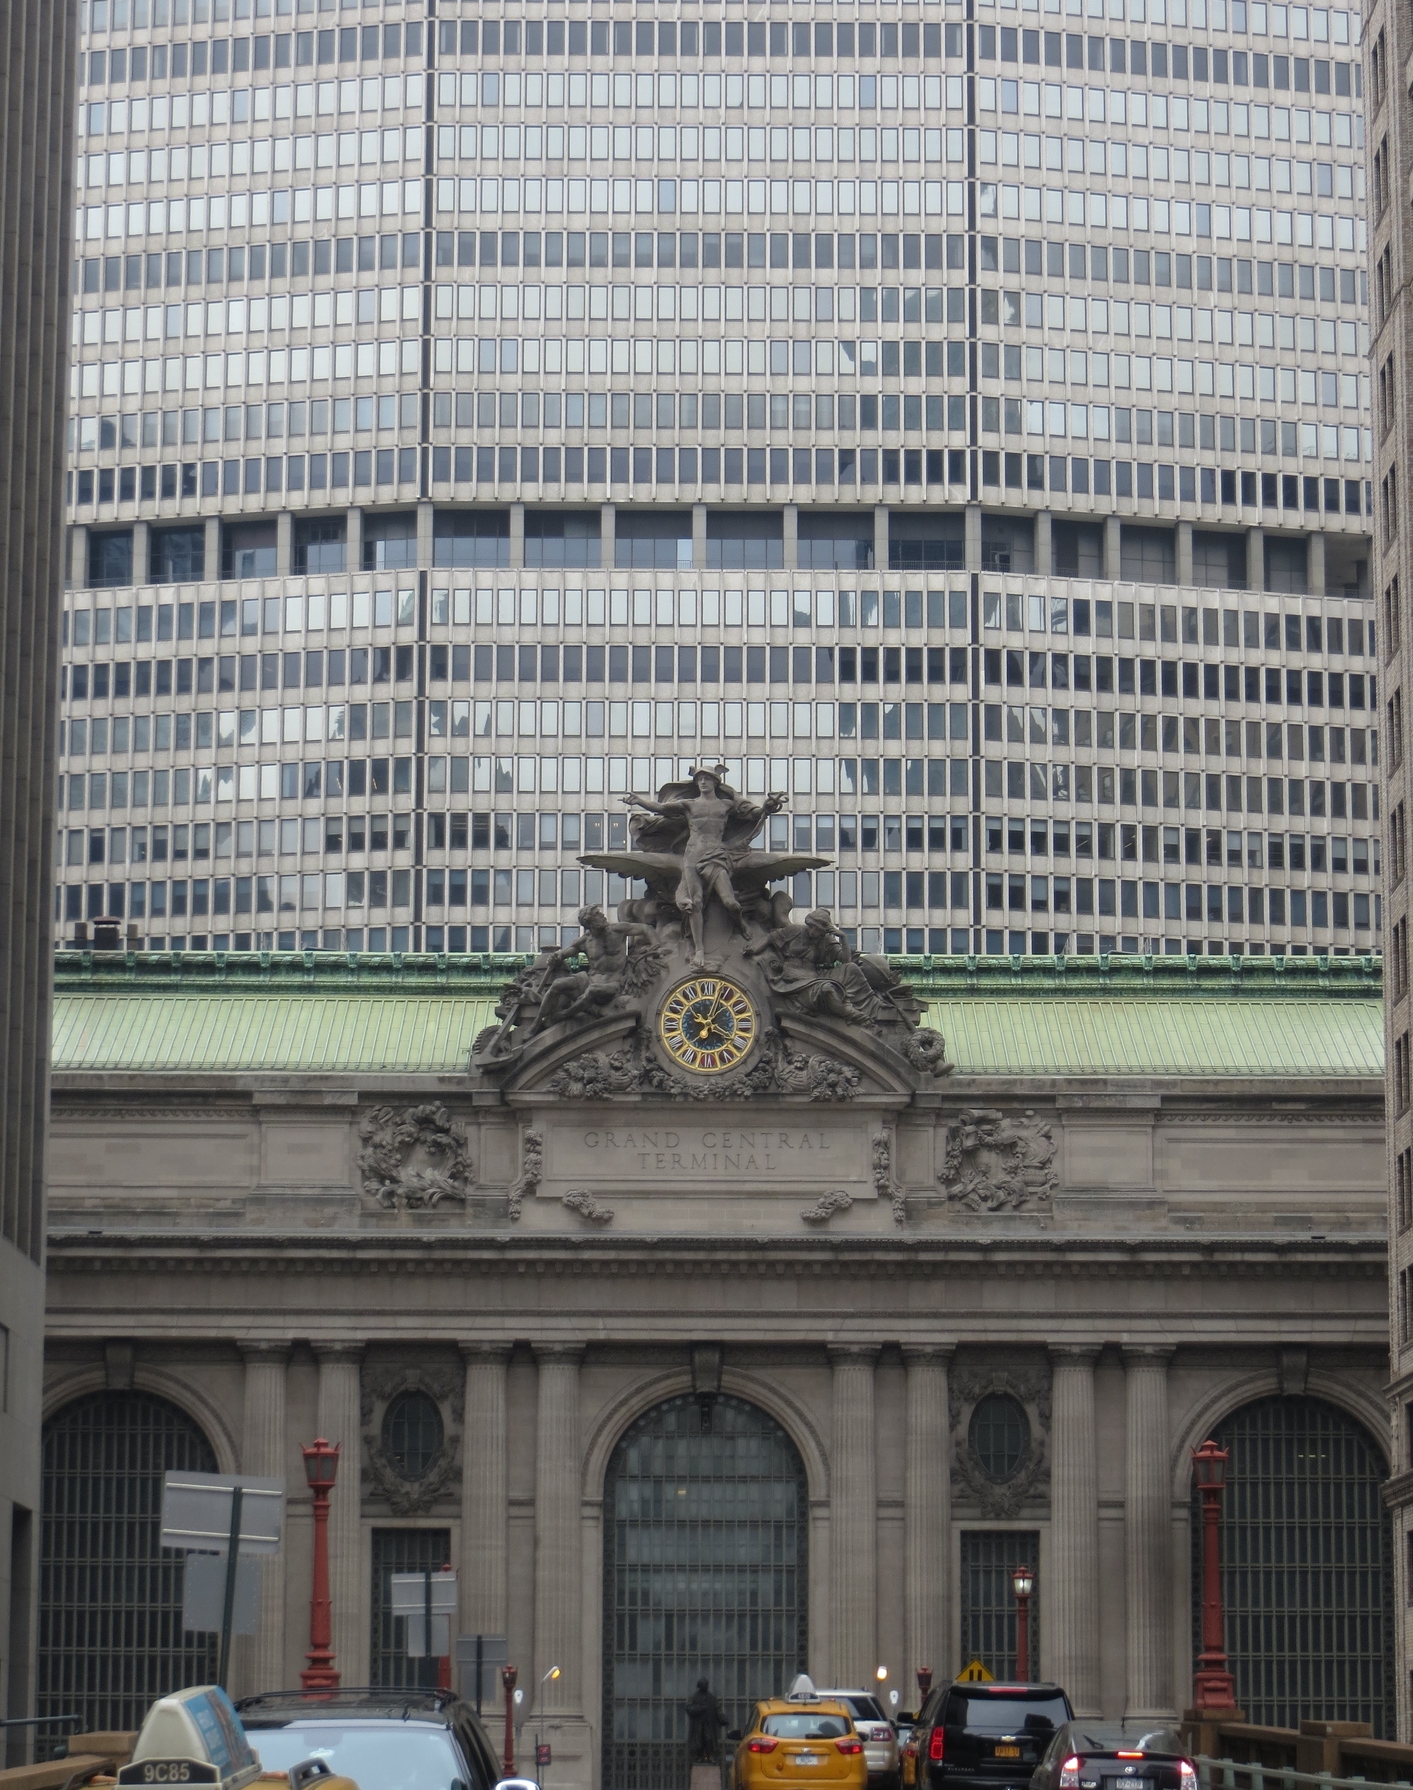 Grand Central Terminal front